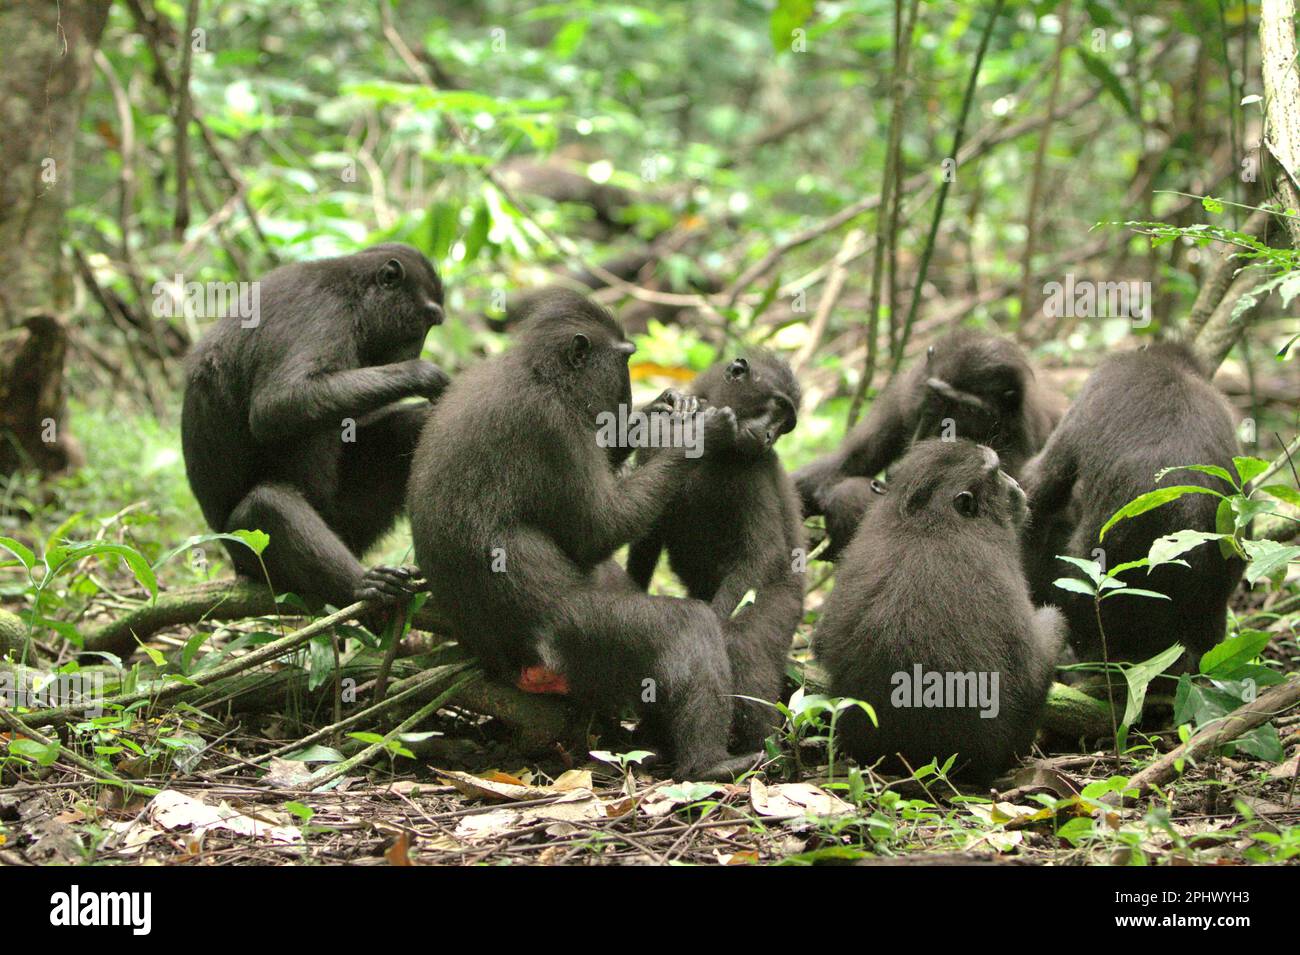 A group of Sulawesi black-crested macaque (Macaca nigra) is having social activity in Tangkoko Nature Reserve in North Sulawesi, Indonesia. Through Macaca Nigra Project and others, over several decades, research teams have come to Tangkoko Reserve, relatively a safe habitat, to study this species, according to a March 2023 summary of scientific research papers collection that is edited by a team of primate scientists led by Jatna Supriatna (accessed on Springer). One of the seven macaque species endemic to the island of Sulawesi, the crested macaque (Macaca nigra) is a socially tolerant... Stock Photo